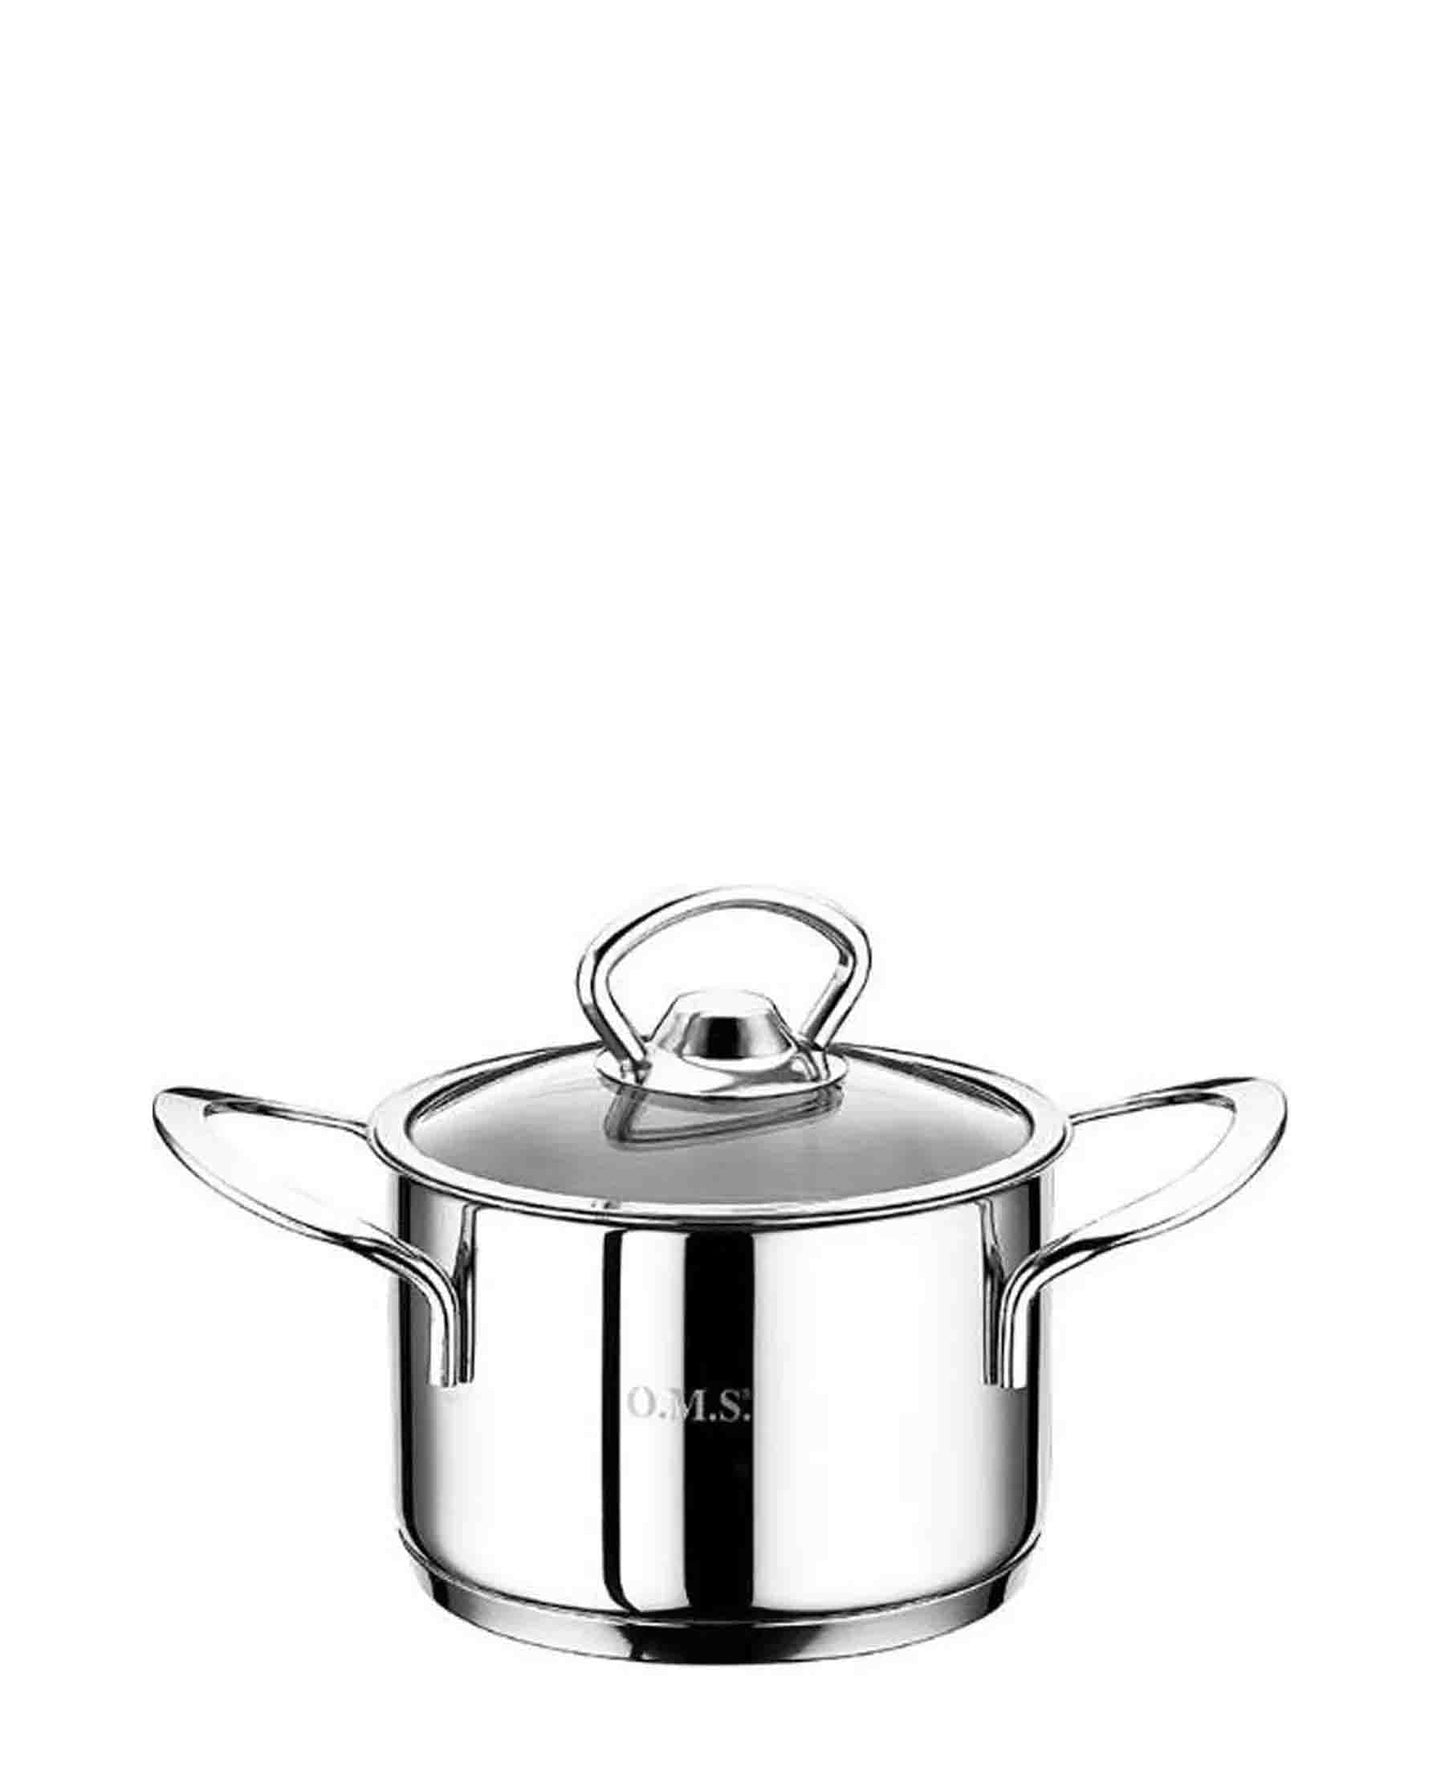 OMS Mini 16cm Stainless Steel Casserole - Silver